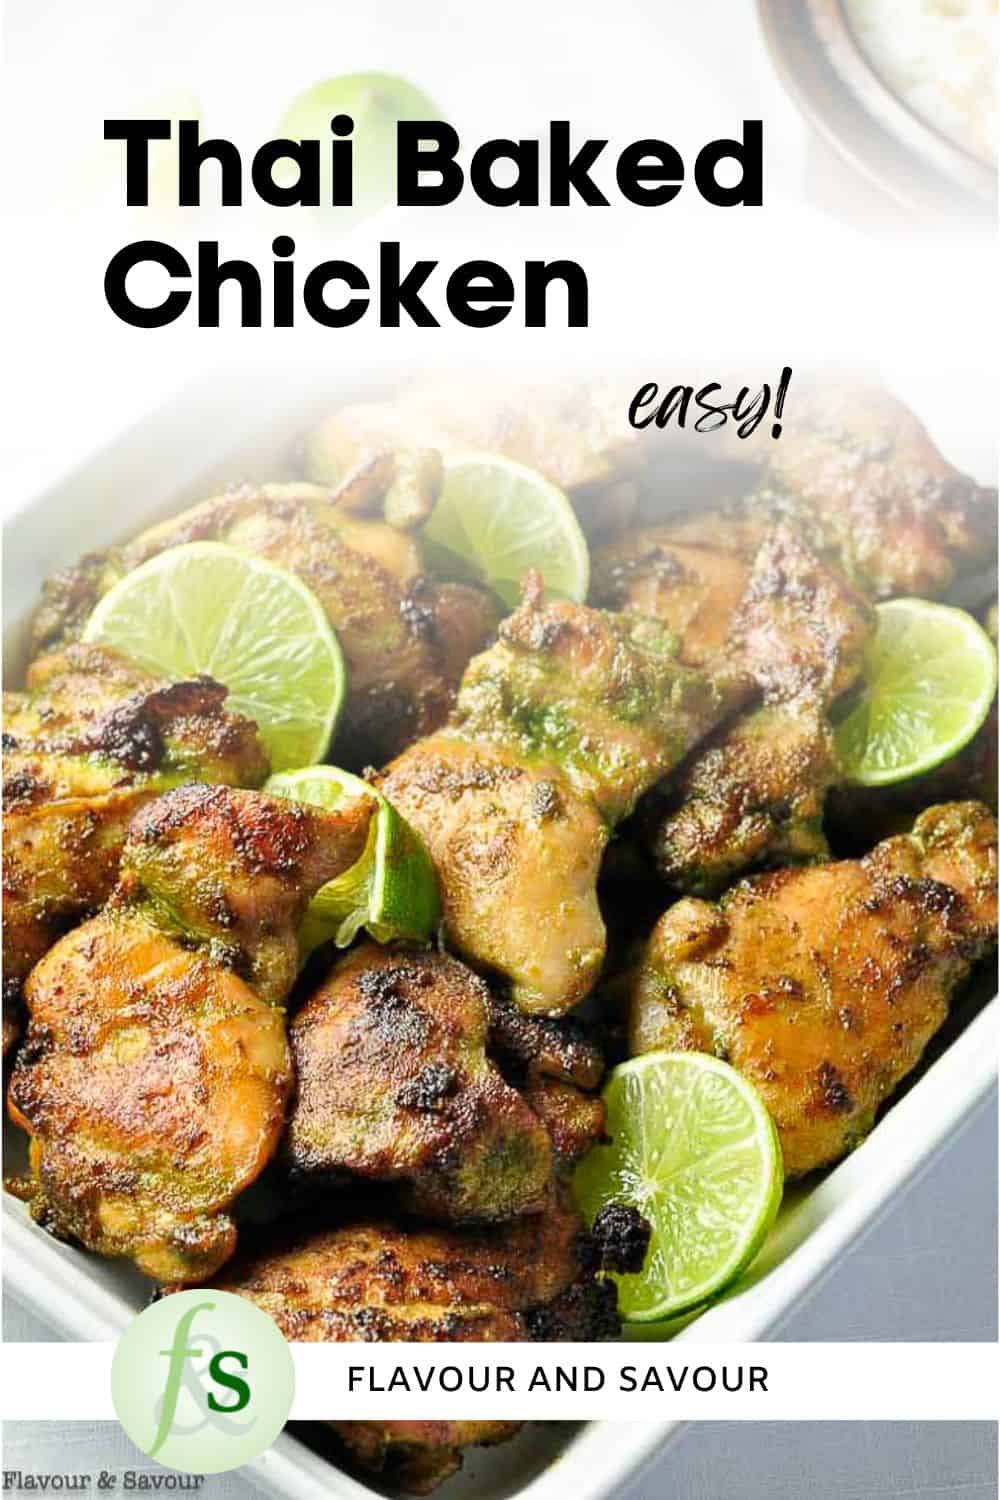 Image with text overlay for easy Thai Baked Chicken.